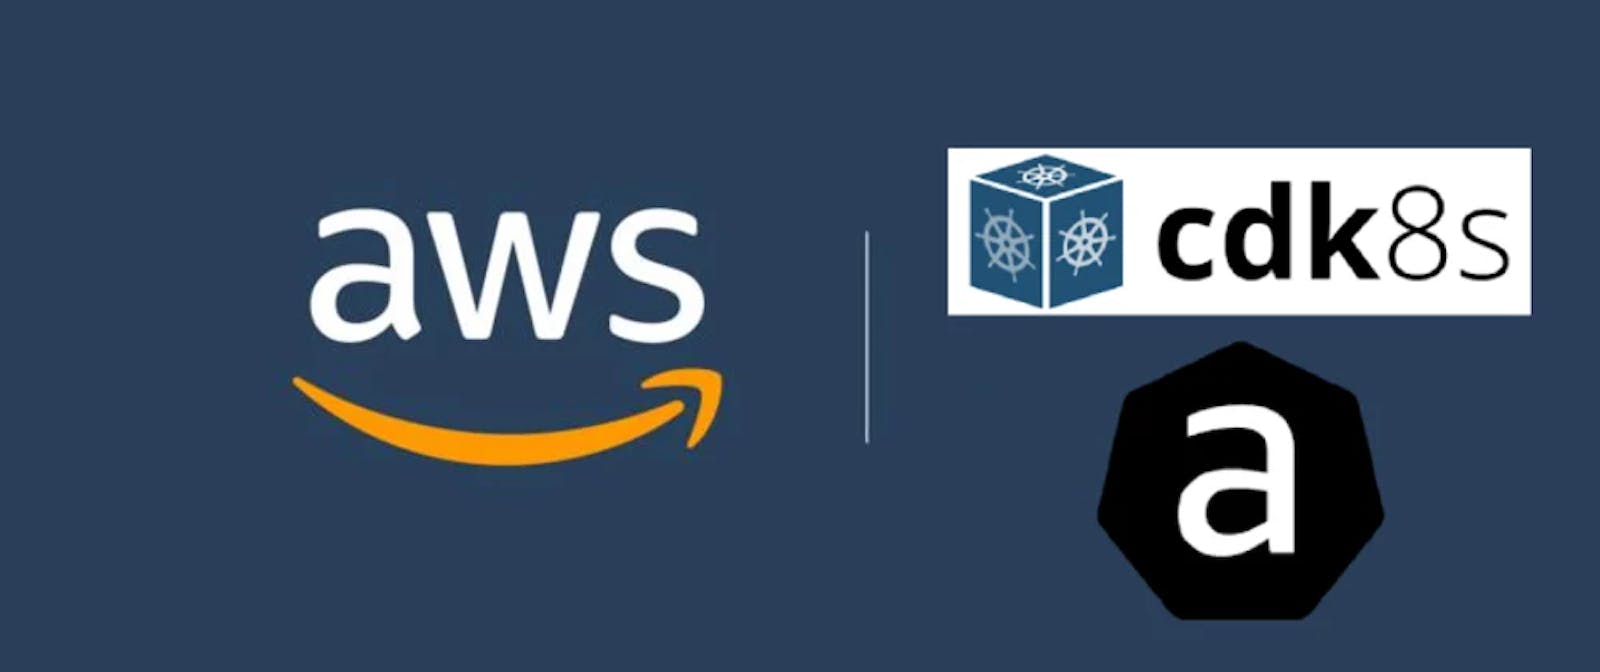 Use CDK8S To Create AWS Controllers for Kubernetes Custom Resources